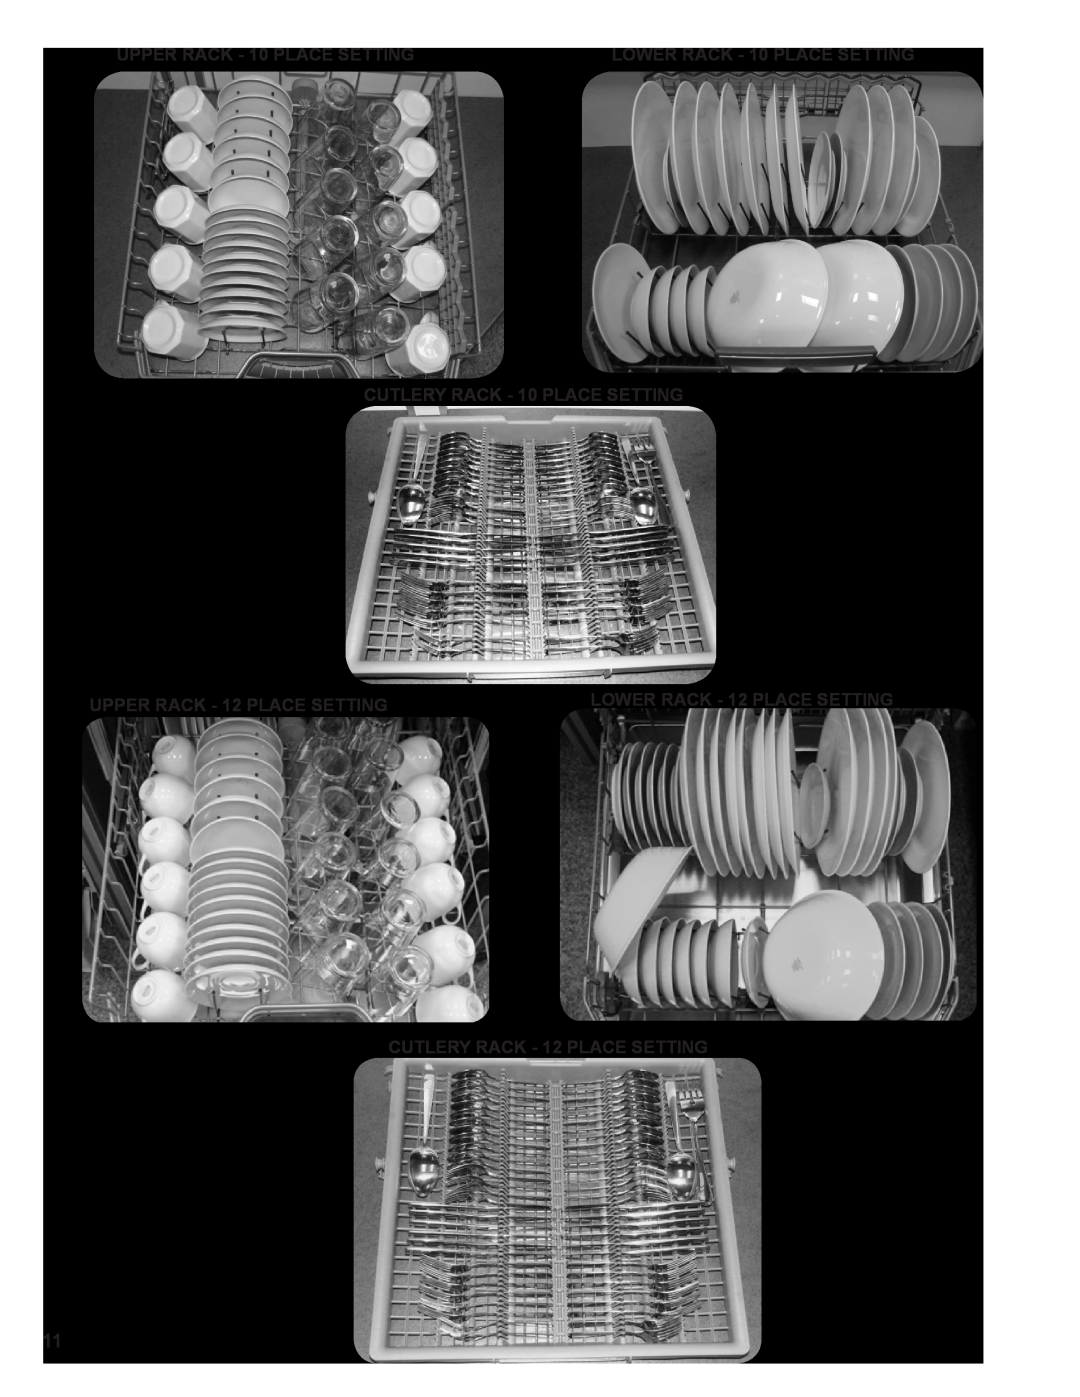 Thermador Dishwasher manual UPPER RACK - 10 PLACE SETTING, LOWER RACK - 10 PLACE SETTING, CUTLERY RACK - 10 PLACE SETTING 